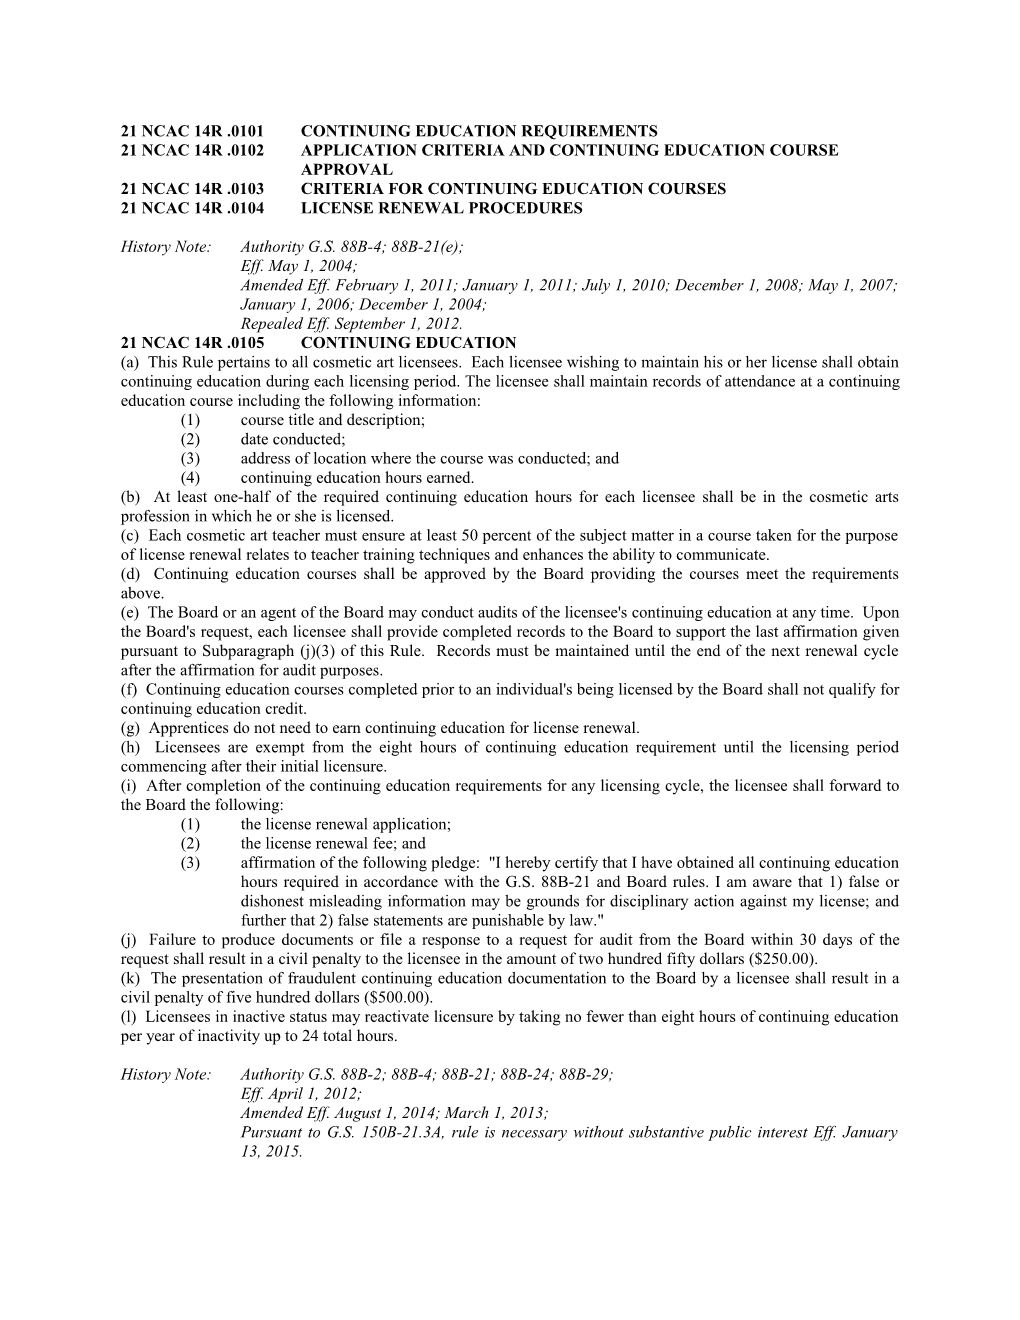 21 Ncac 14R .0102Application Criteria and Continuing Education Course Approval